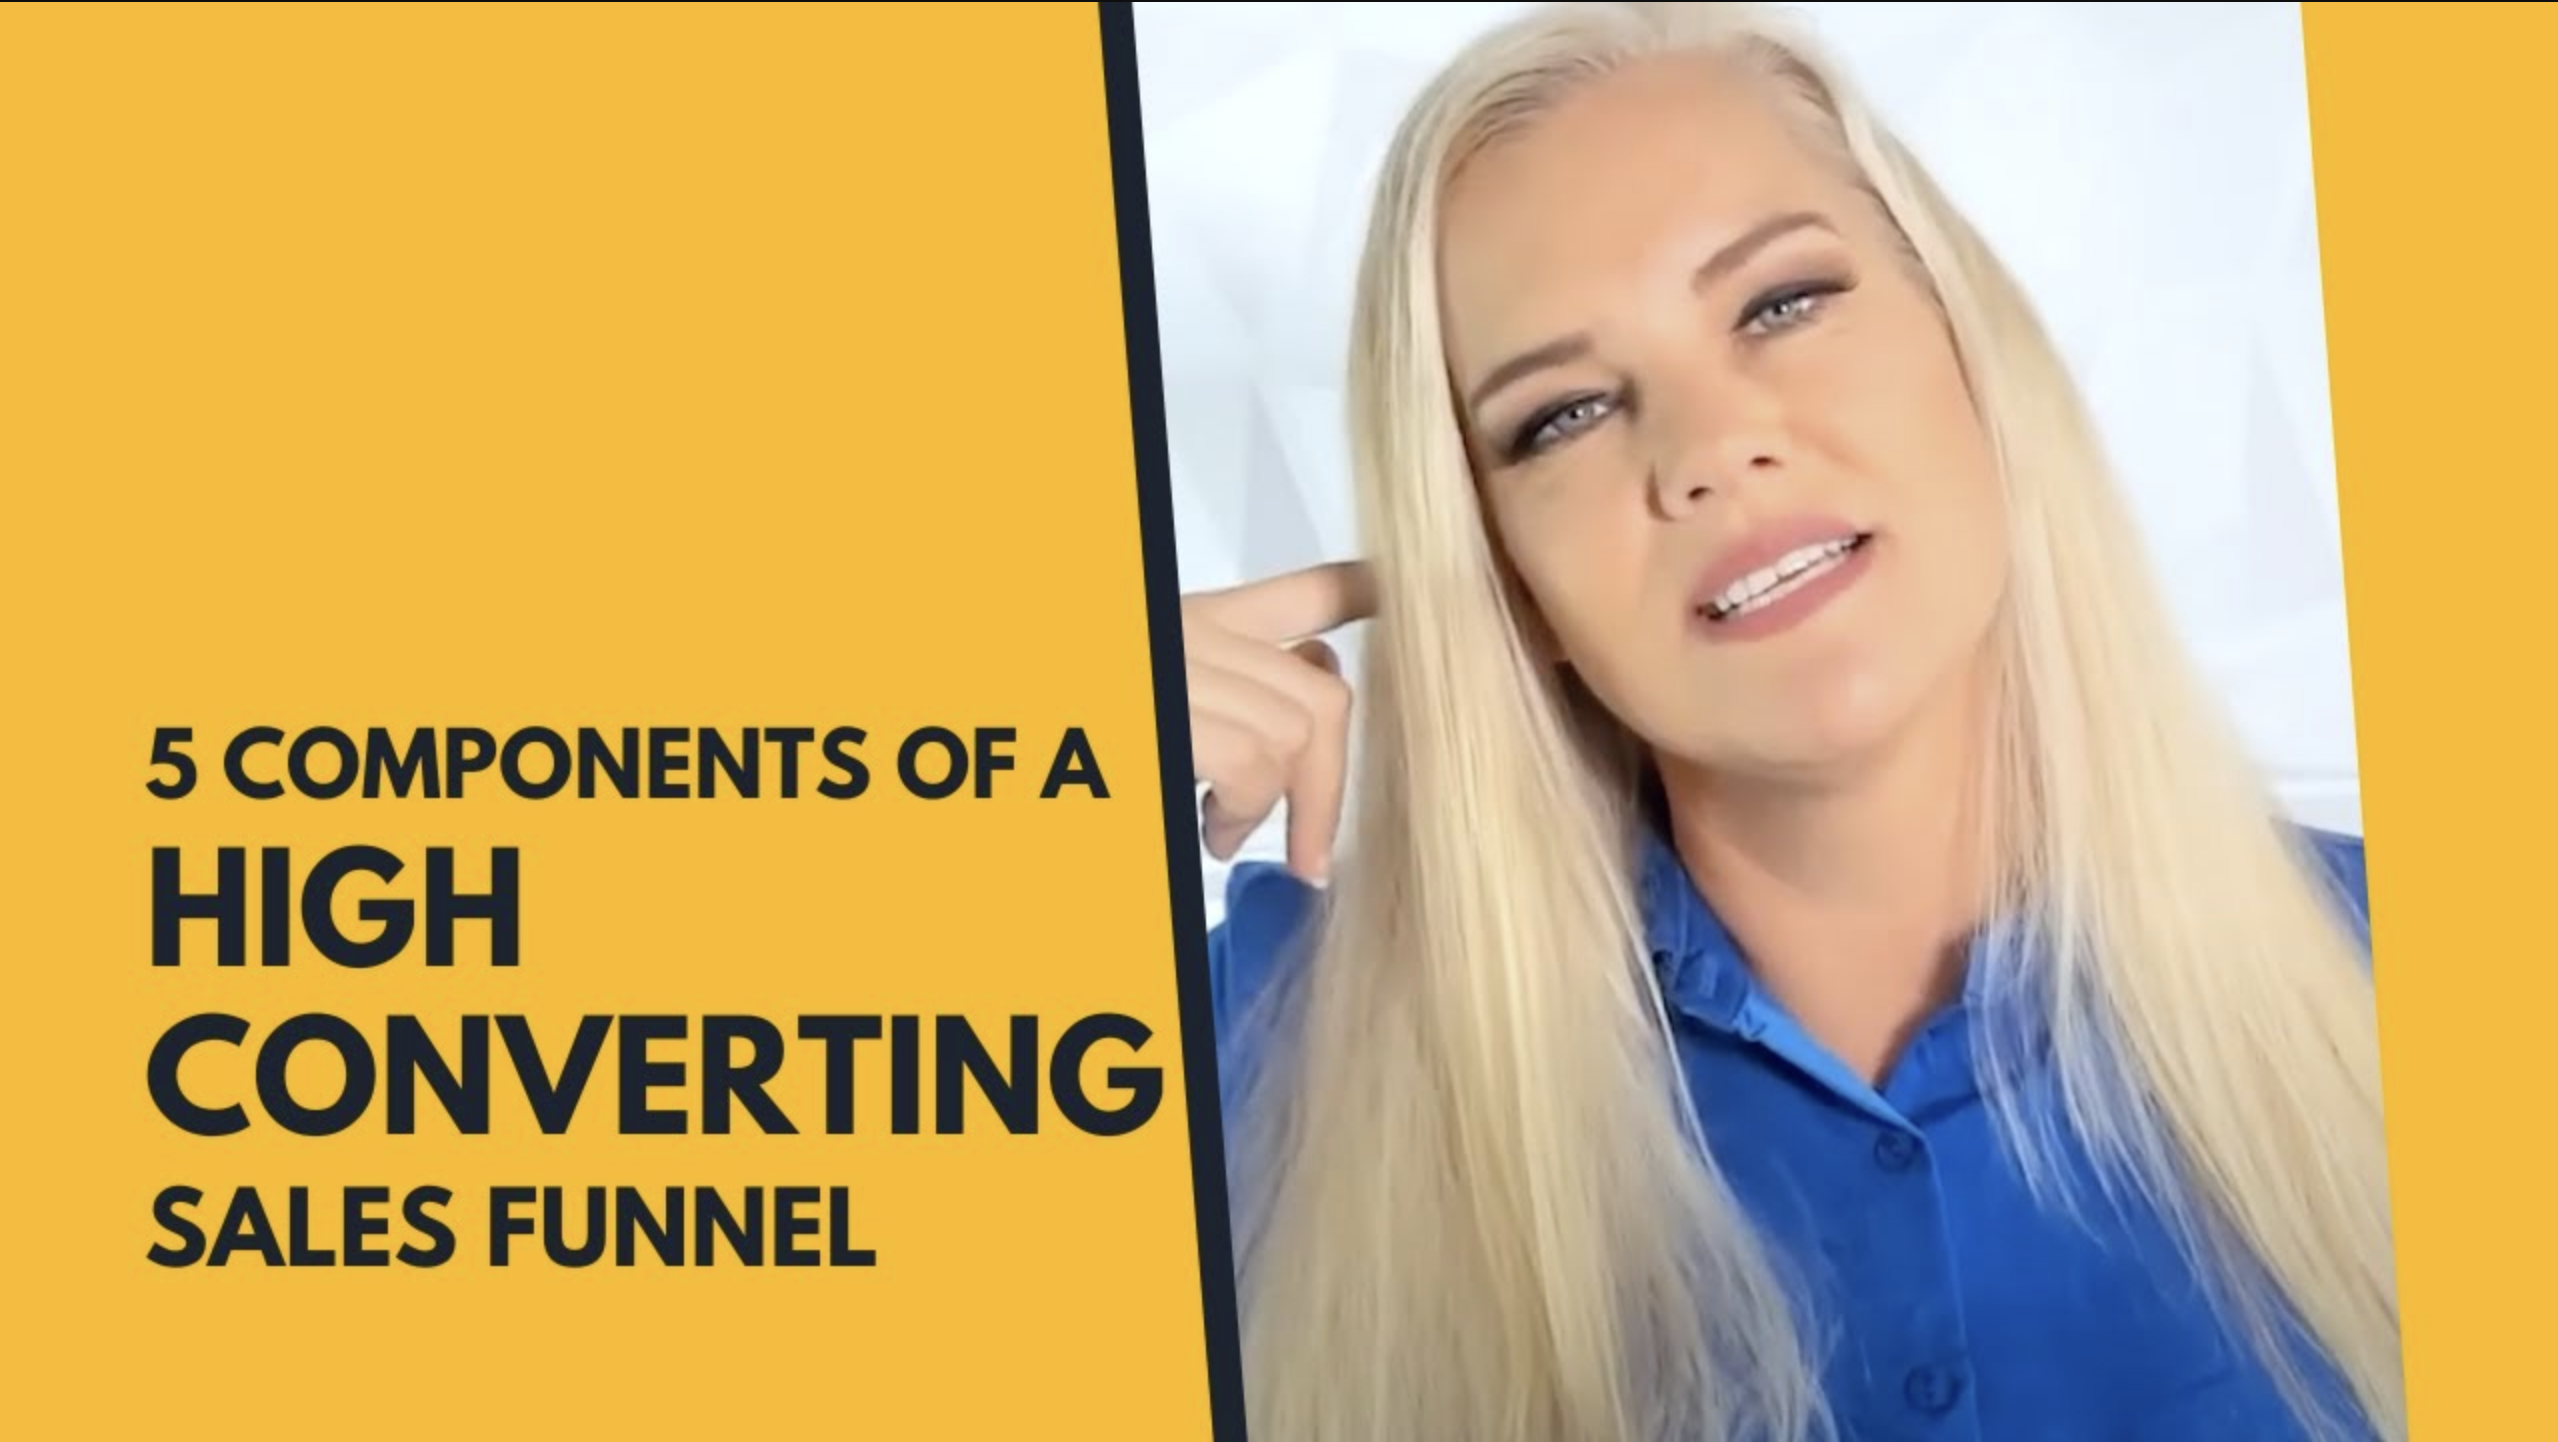 5 Components of a High Converting Funnel